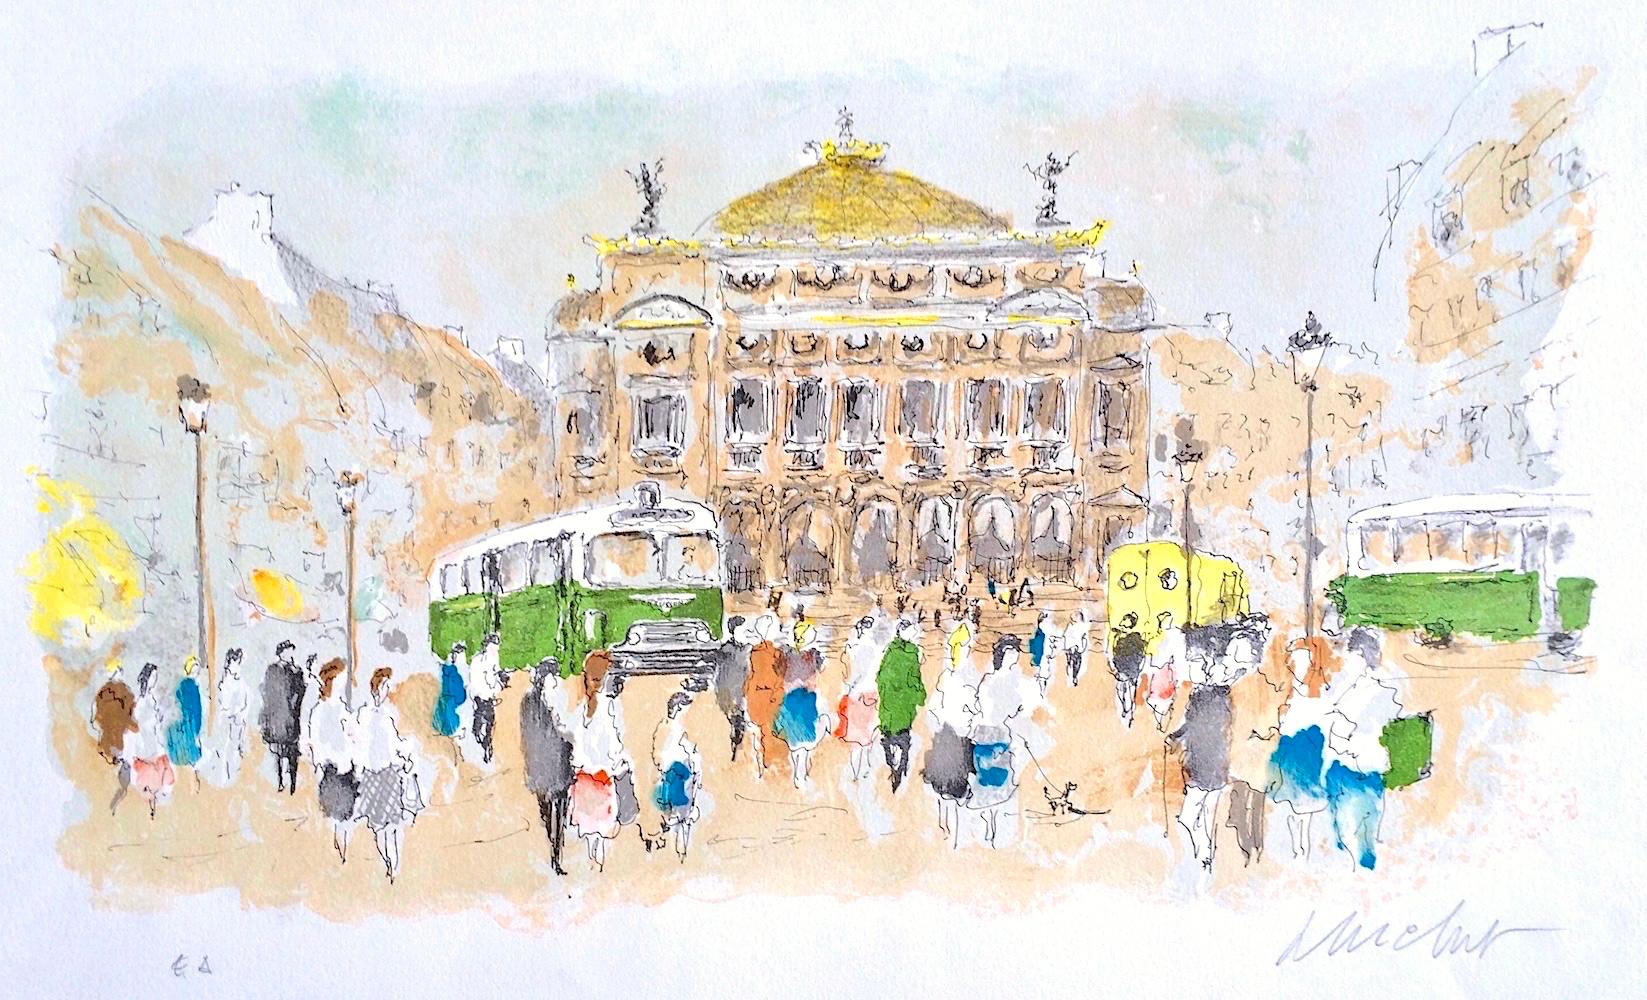 PARIS OPERA HOUSE Signed Lithograph, Iconic French Architecture, Green Bus Paris